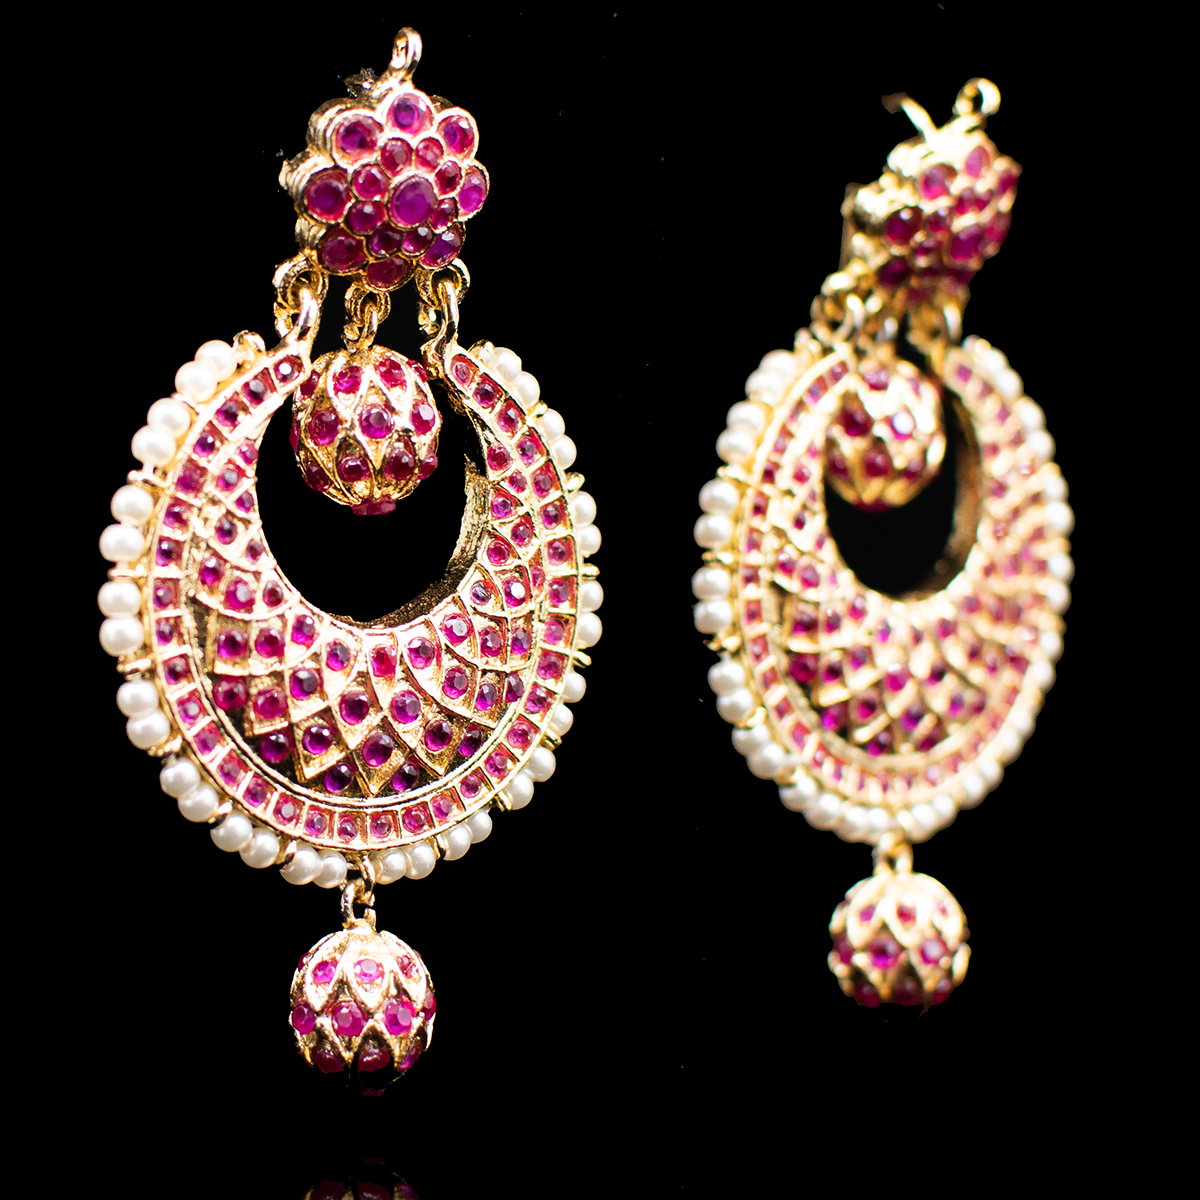 Swati Earrings - Available in 2 Colors